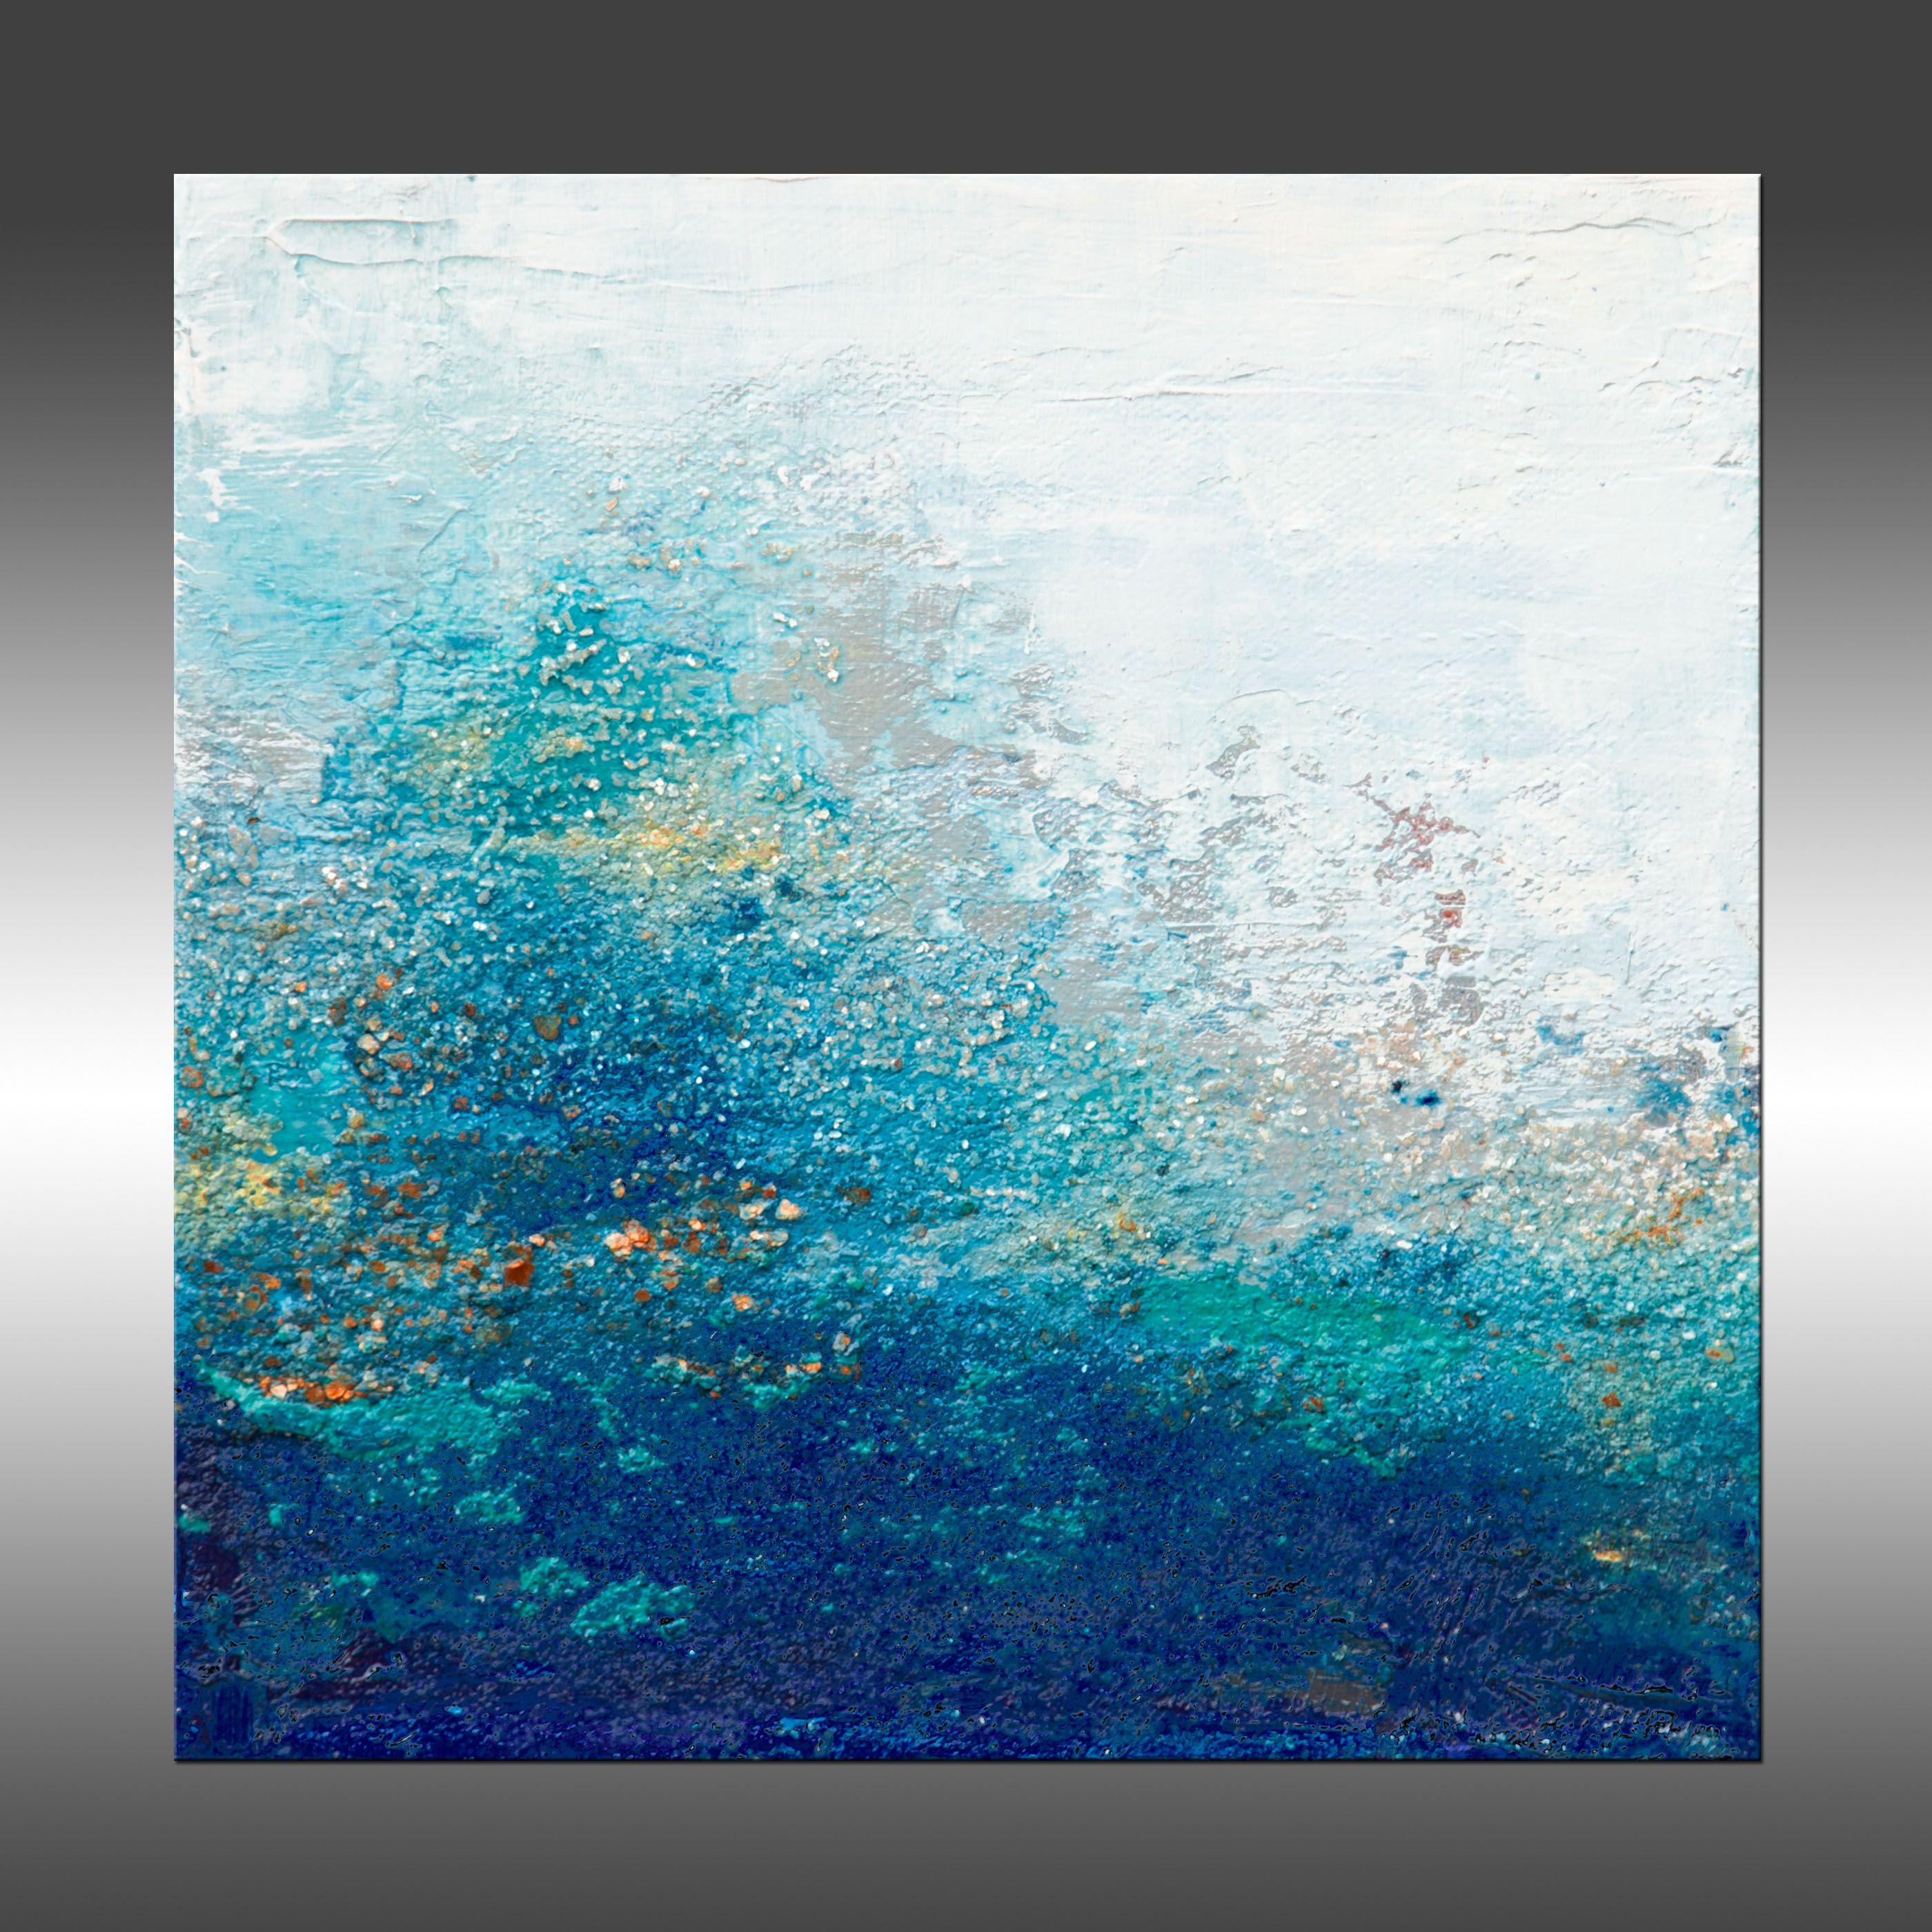 Views of Nature 74 is an original painting, created with acrylic paint on gallery-wrapped canvas. It has a width of 8 inches and a height of 8 inches with a depth of 1.5 inches (8x8x1.5).    The colors used in the painting are white, blue, gray,